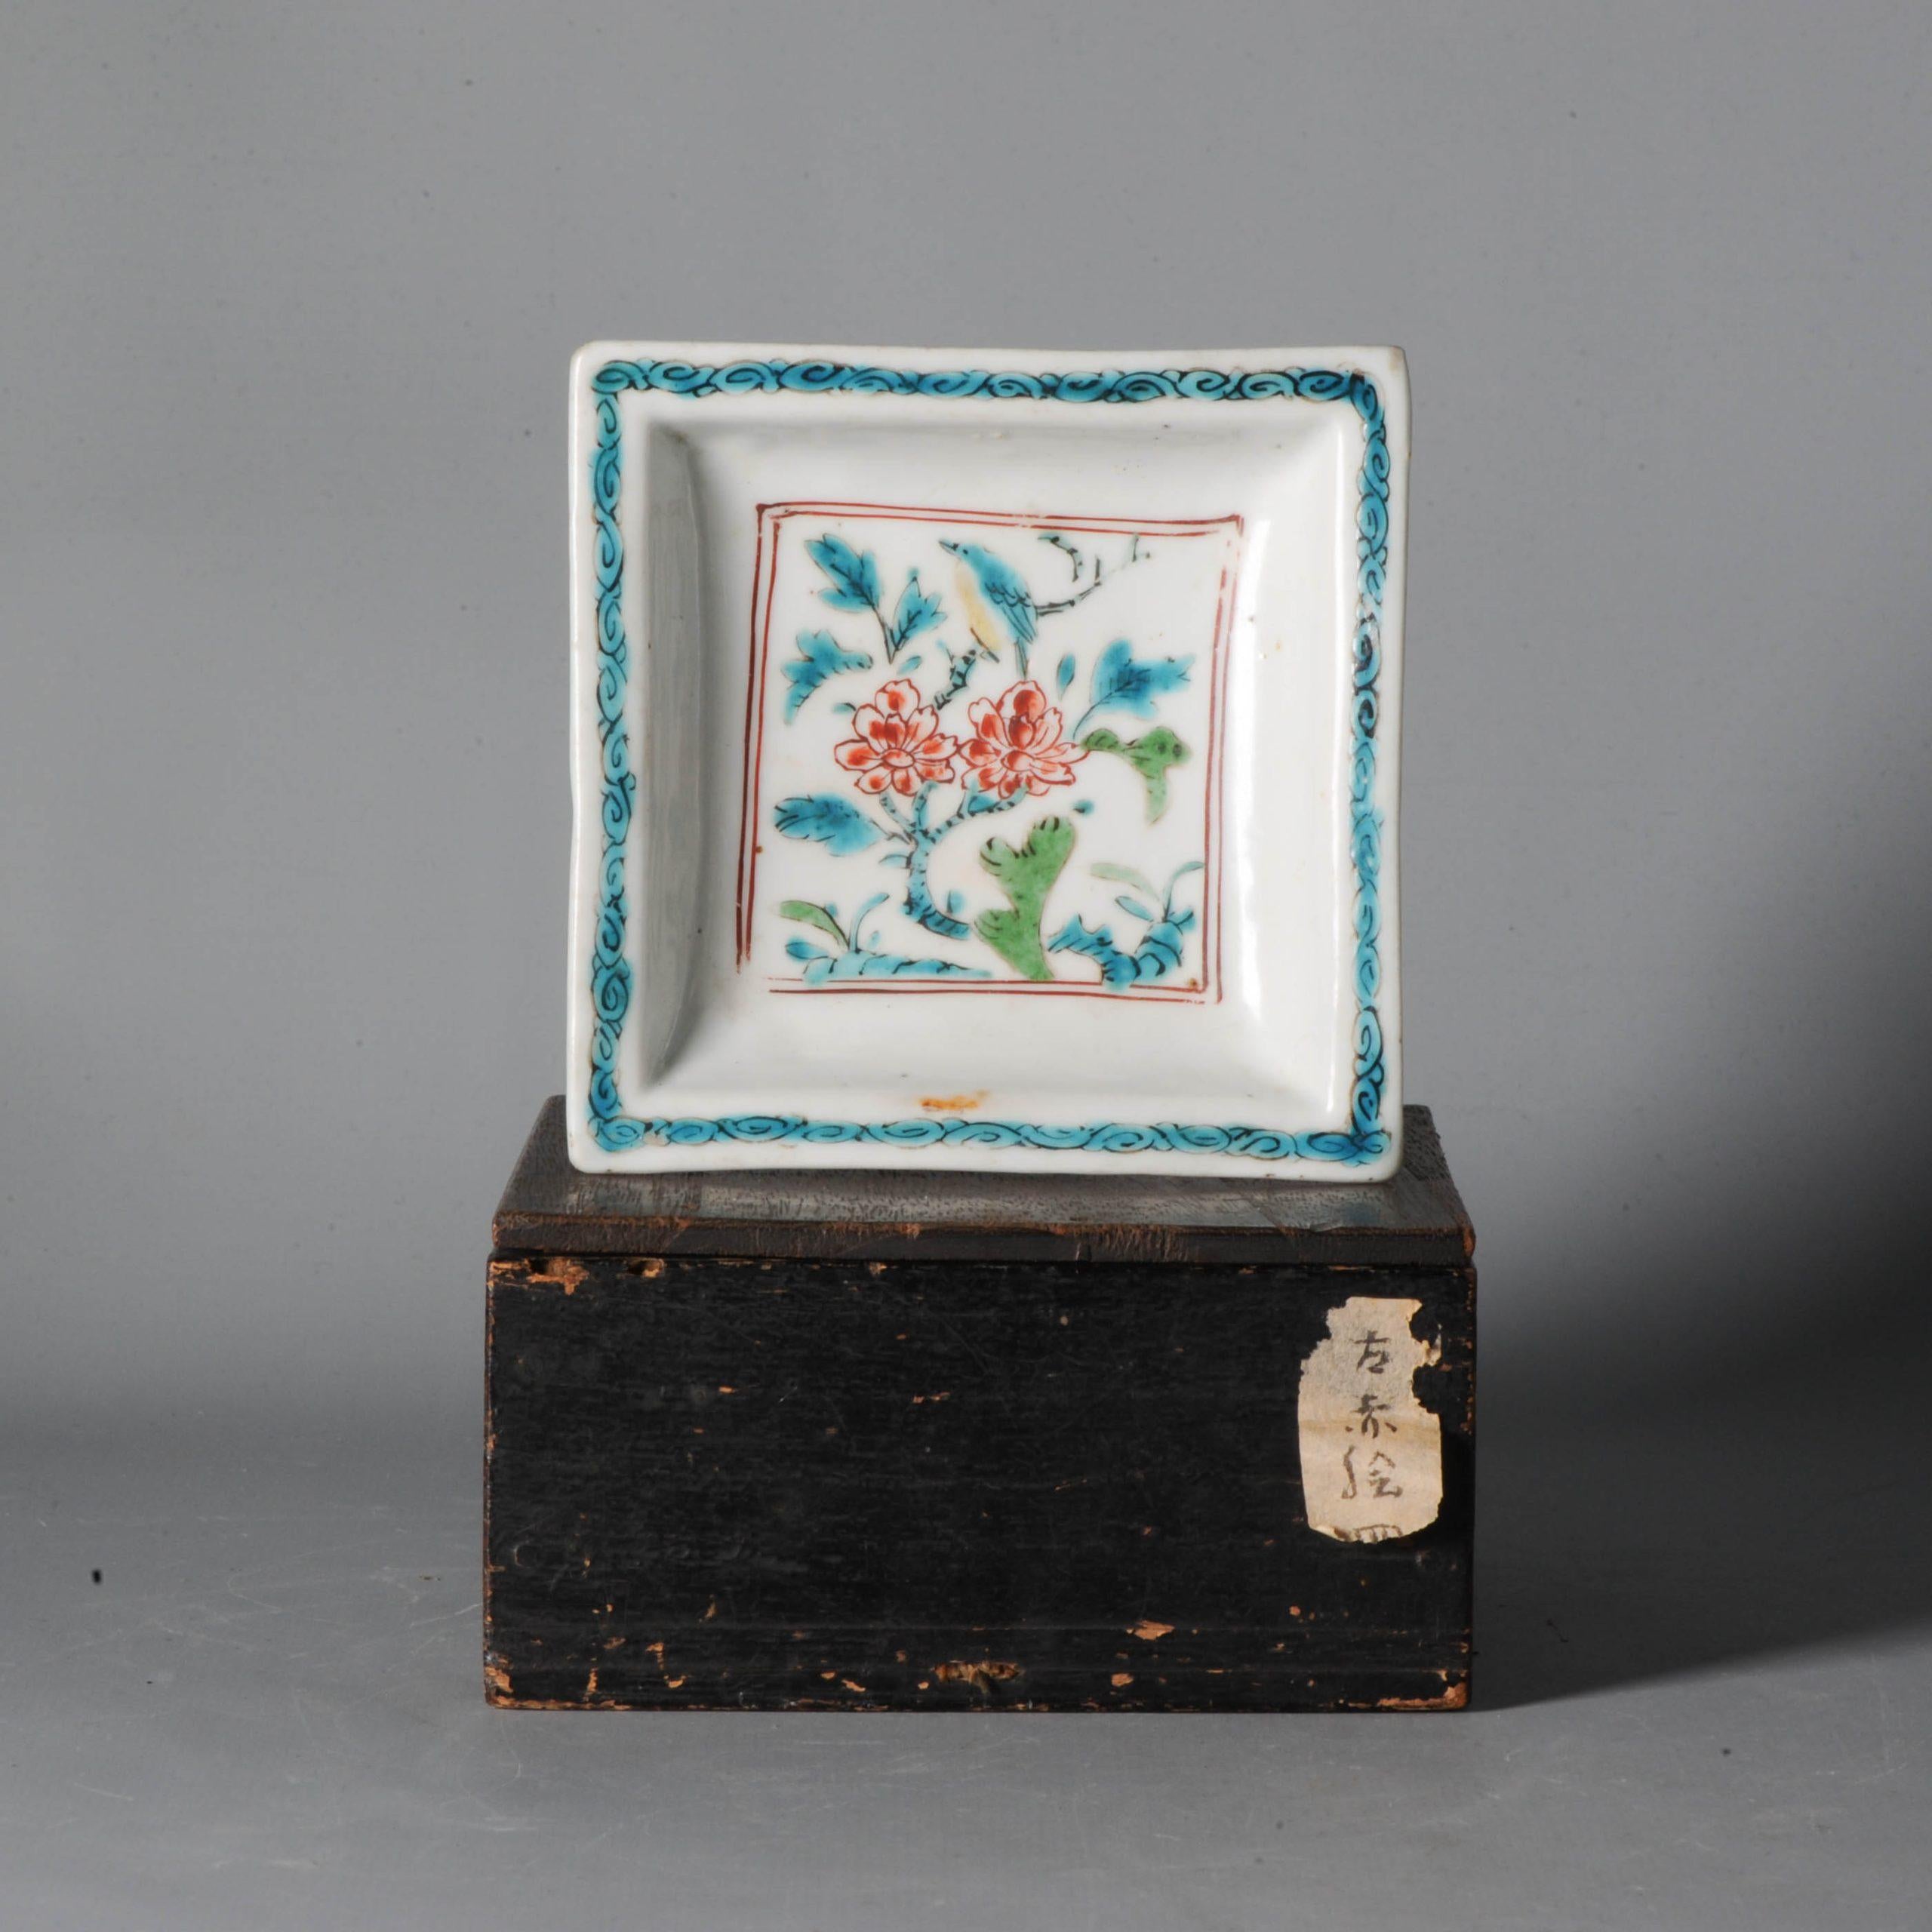 Sharing with you this lovely and unusual square serving dish from the late Ming period. Jingdezhen made for the Japanese market, Ming dynasty, Tianqi or Chongzhen period (1621-1644). Must have been part of a set of 5 for the Kaiseki meal (see